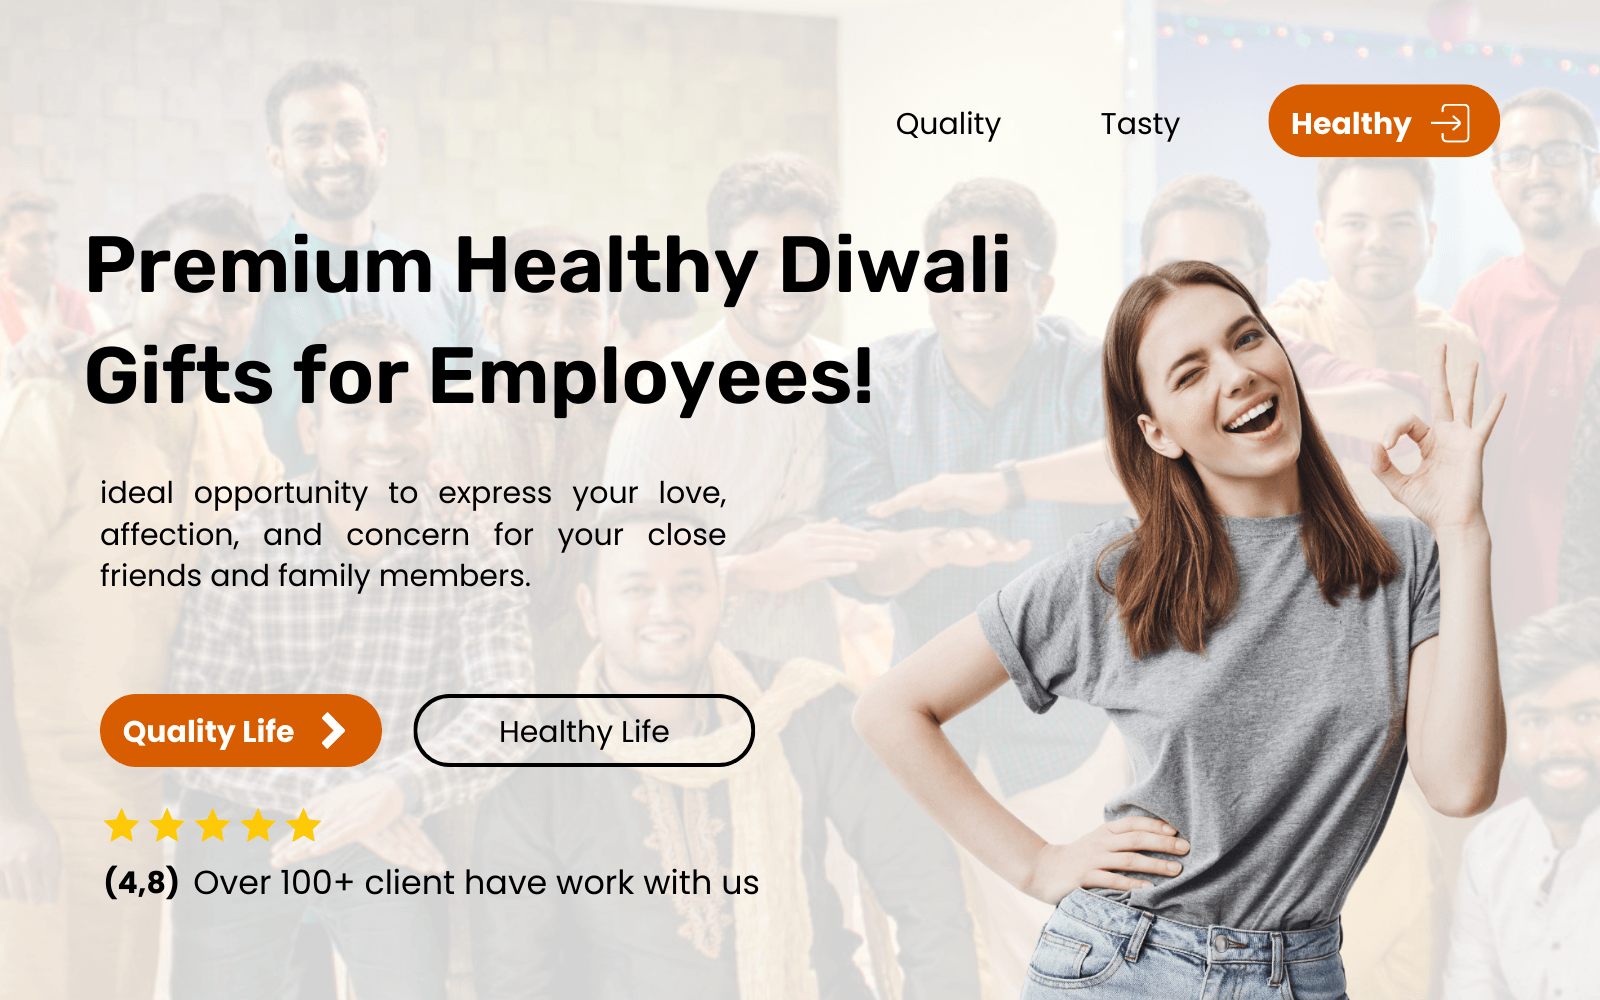 Affordable Premium Healthy Diwali Gifts for Employees!